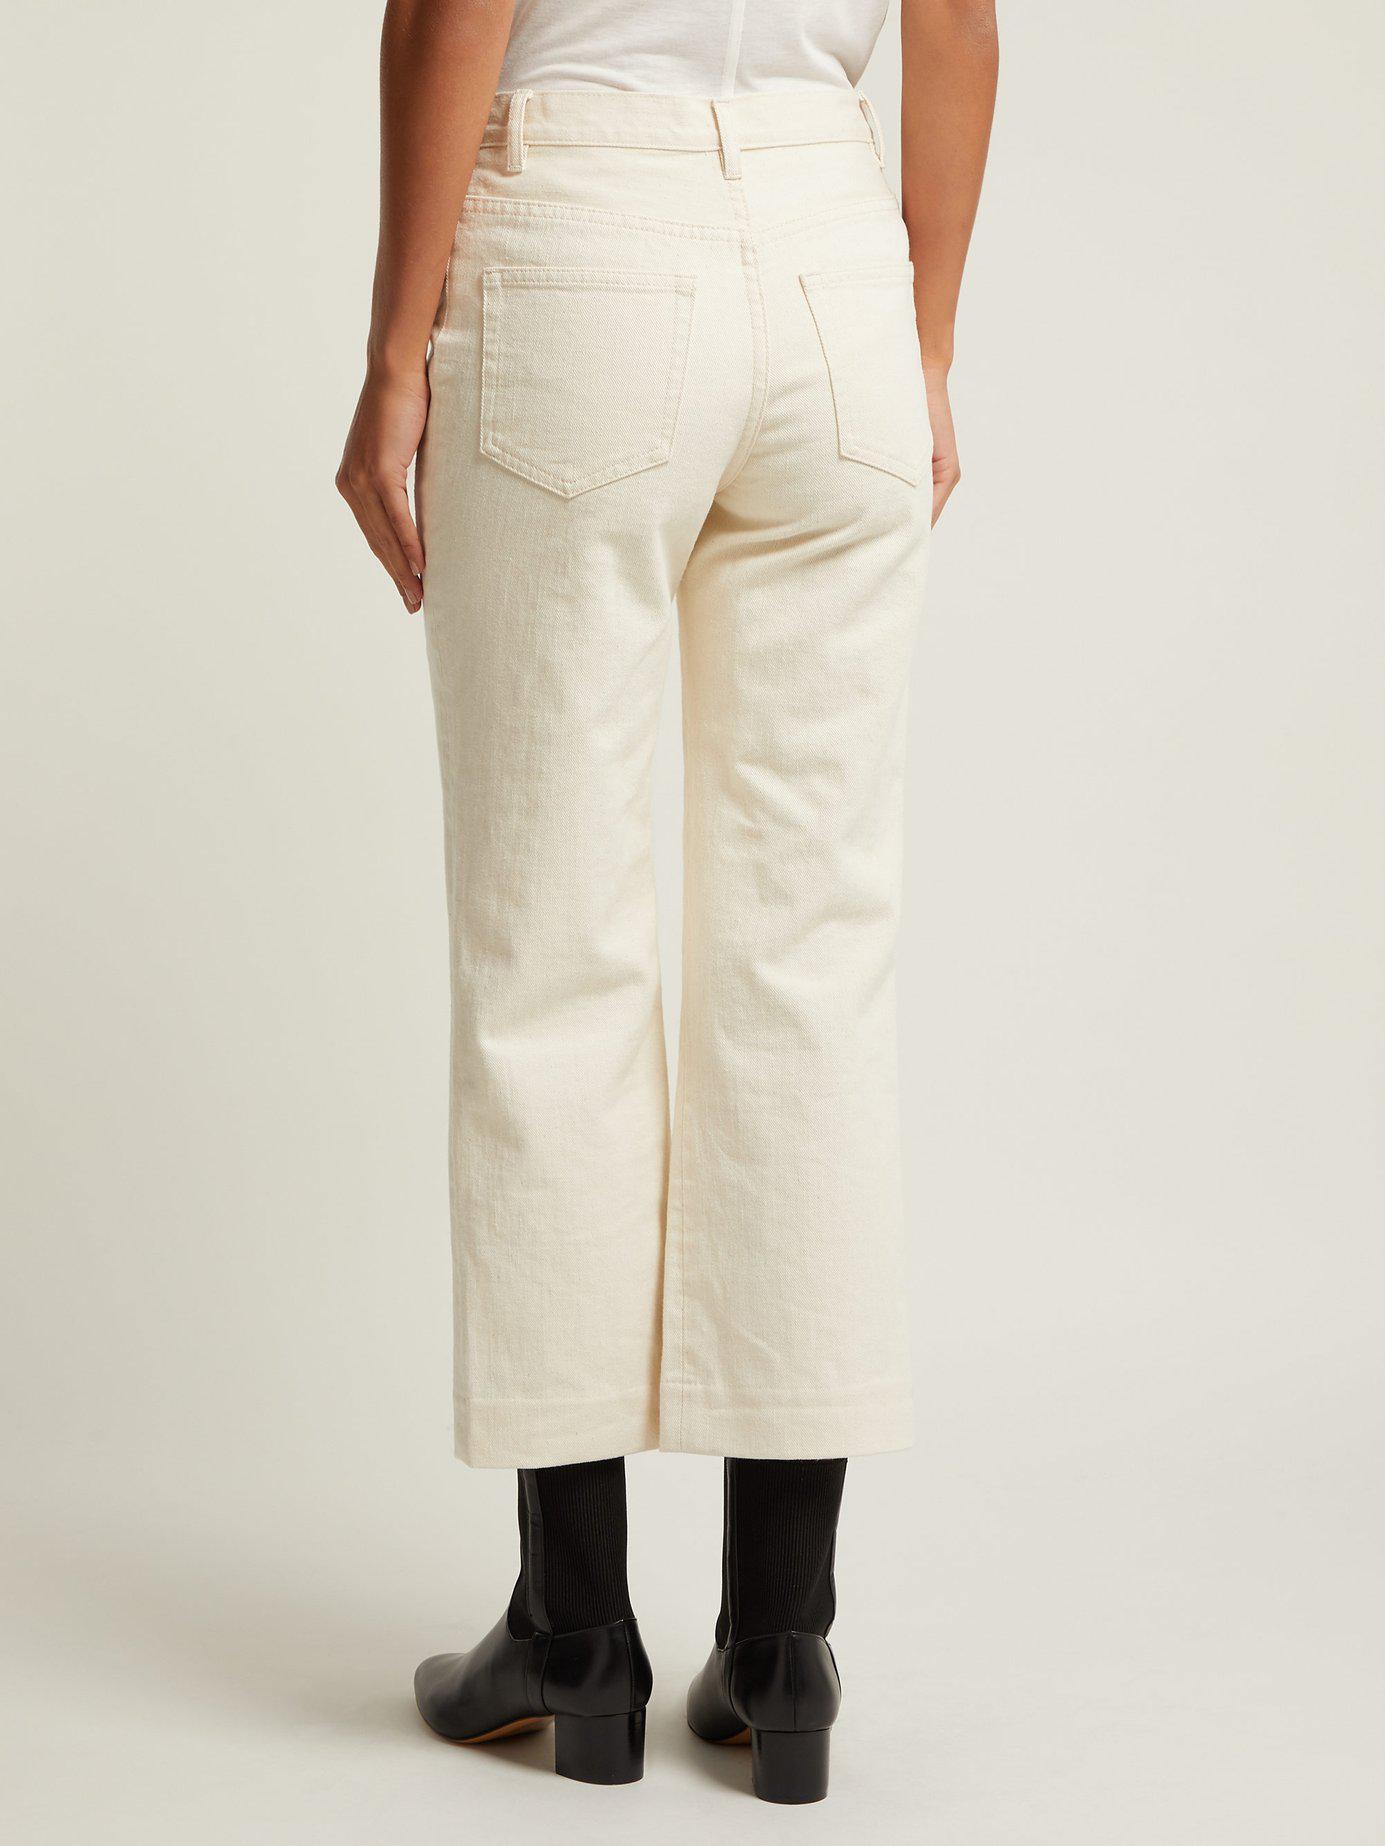 A.P.C. Denim Sailor Mid Rise Cropped Jeans in Cream (Natural) - Lyst